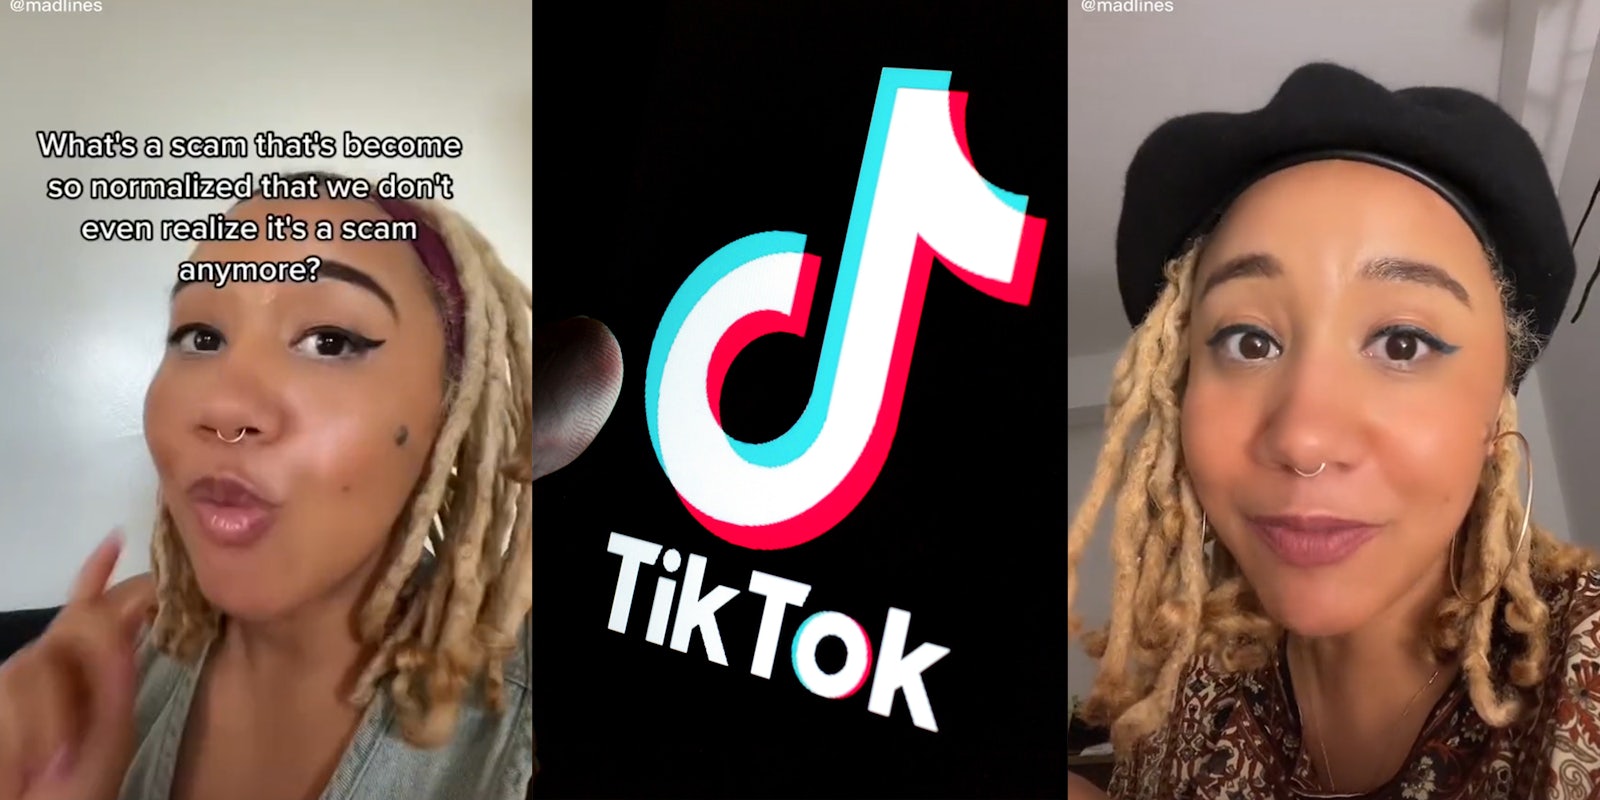 young woman with caption 'What's a scam that's become so normalized that we don't even realize it's a scam anymore?' (l) finger touching TikTok logo (c) young woman (r)